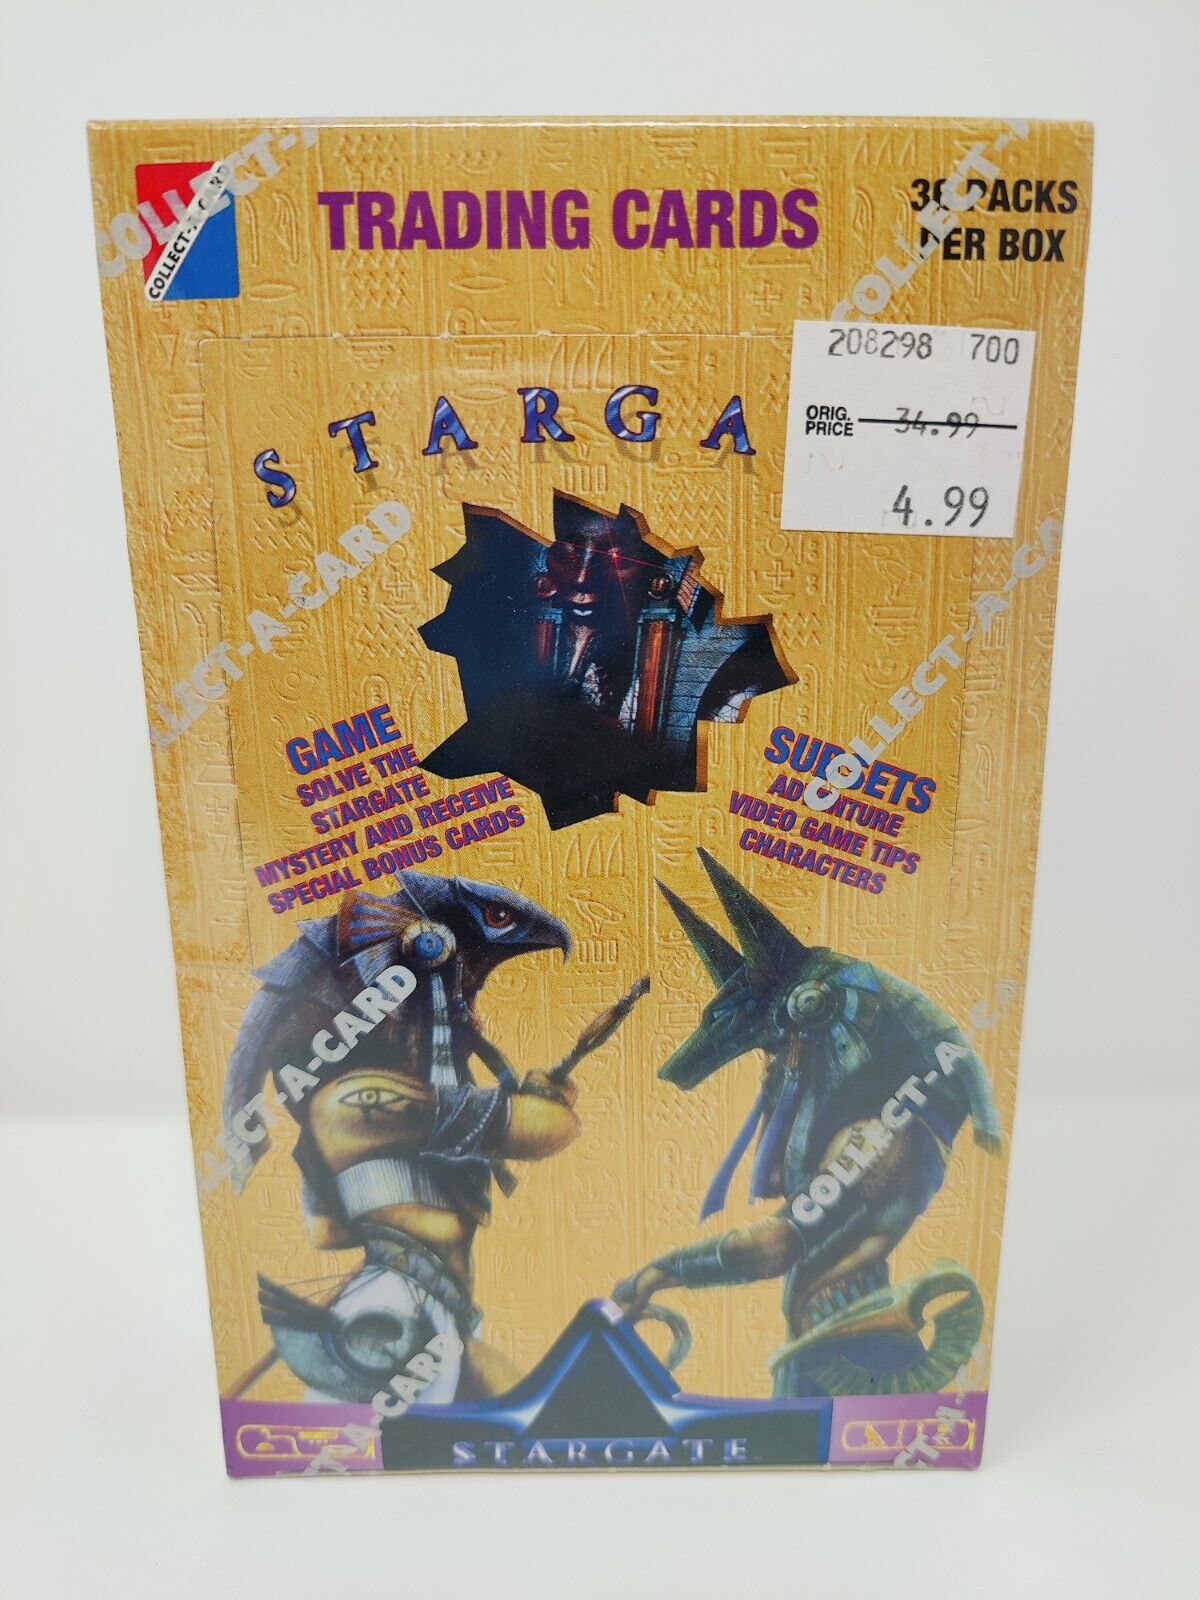 Stargate Trading Cards 36 Packs Box Collect-A-Card 1994 SEALED